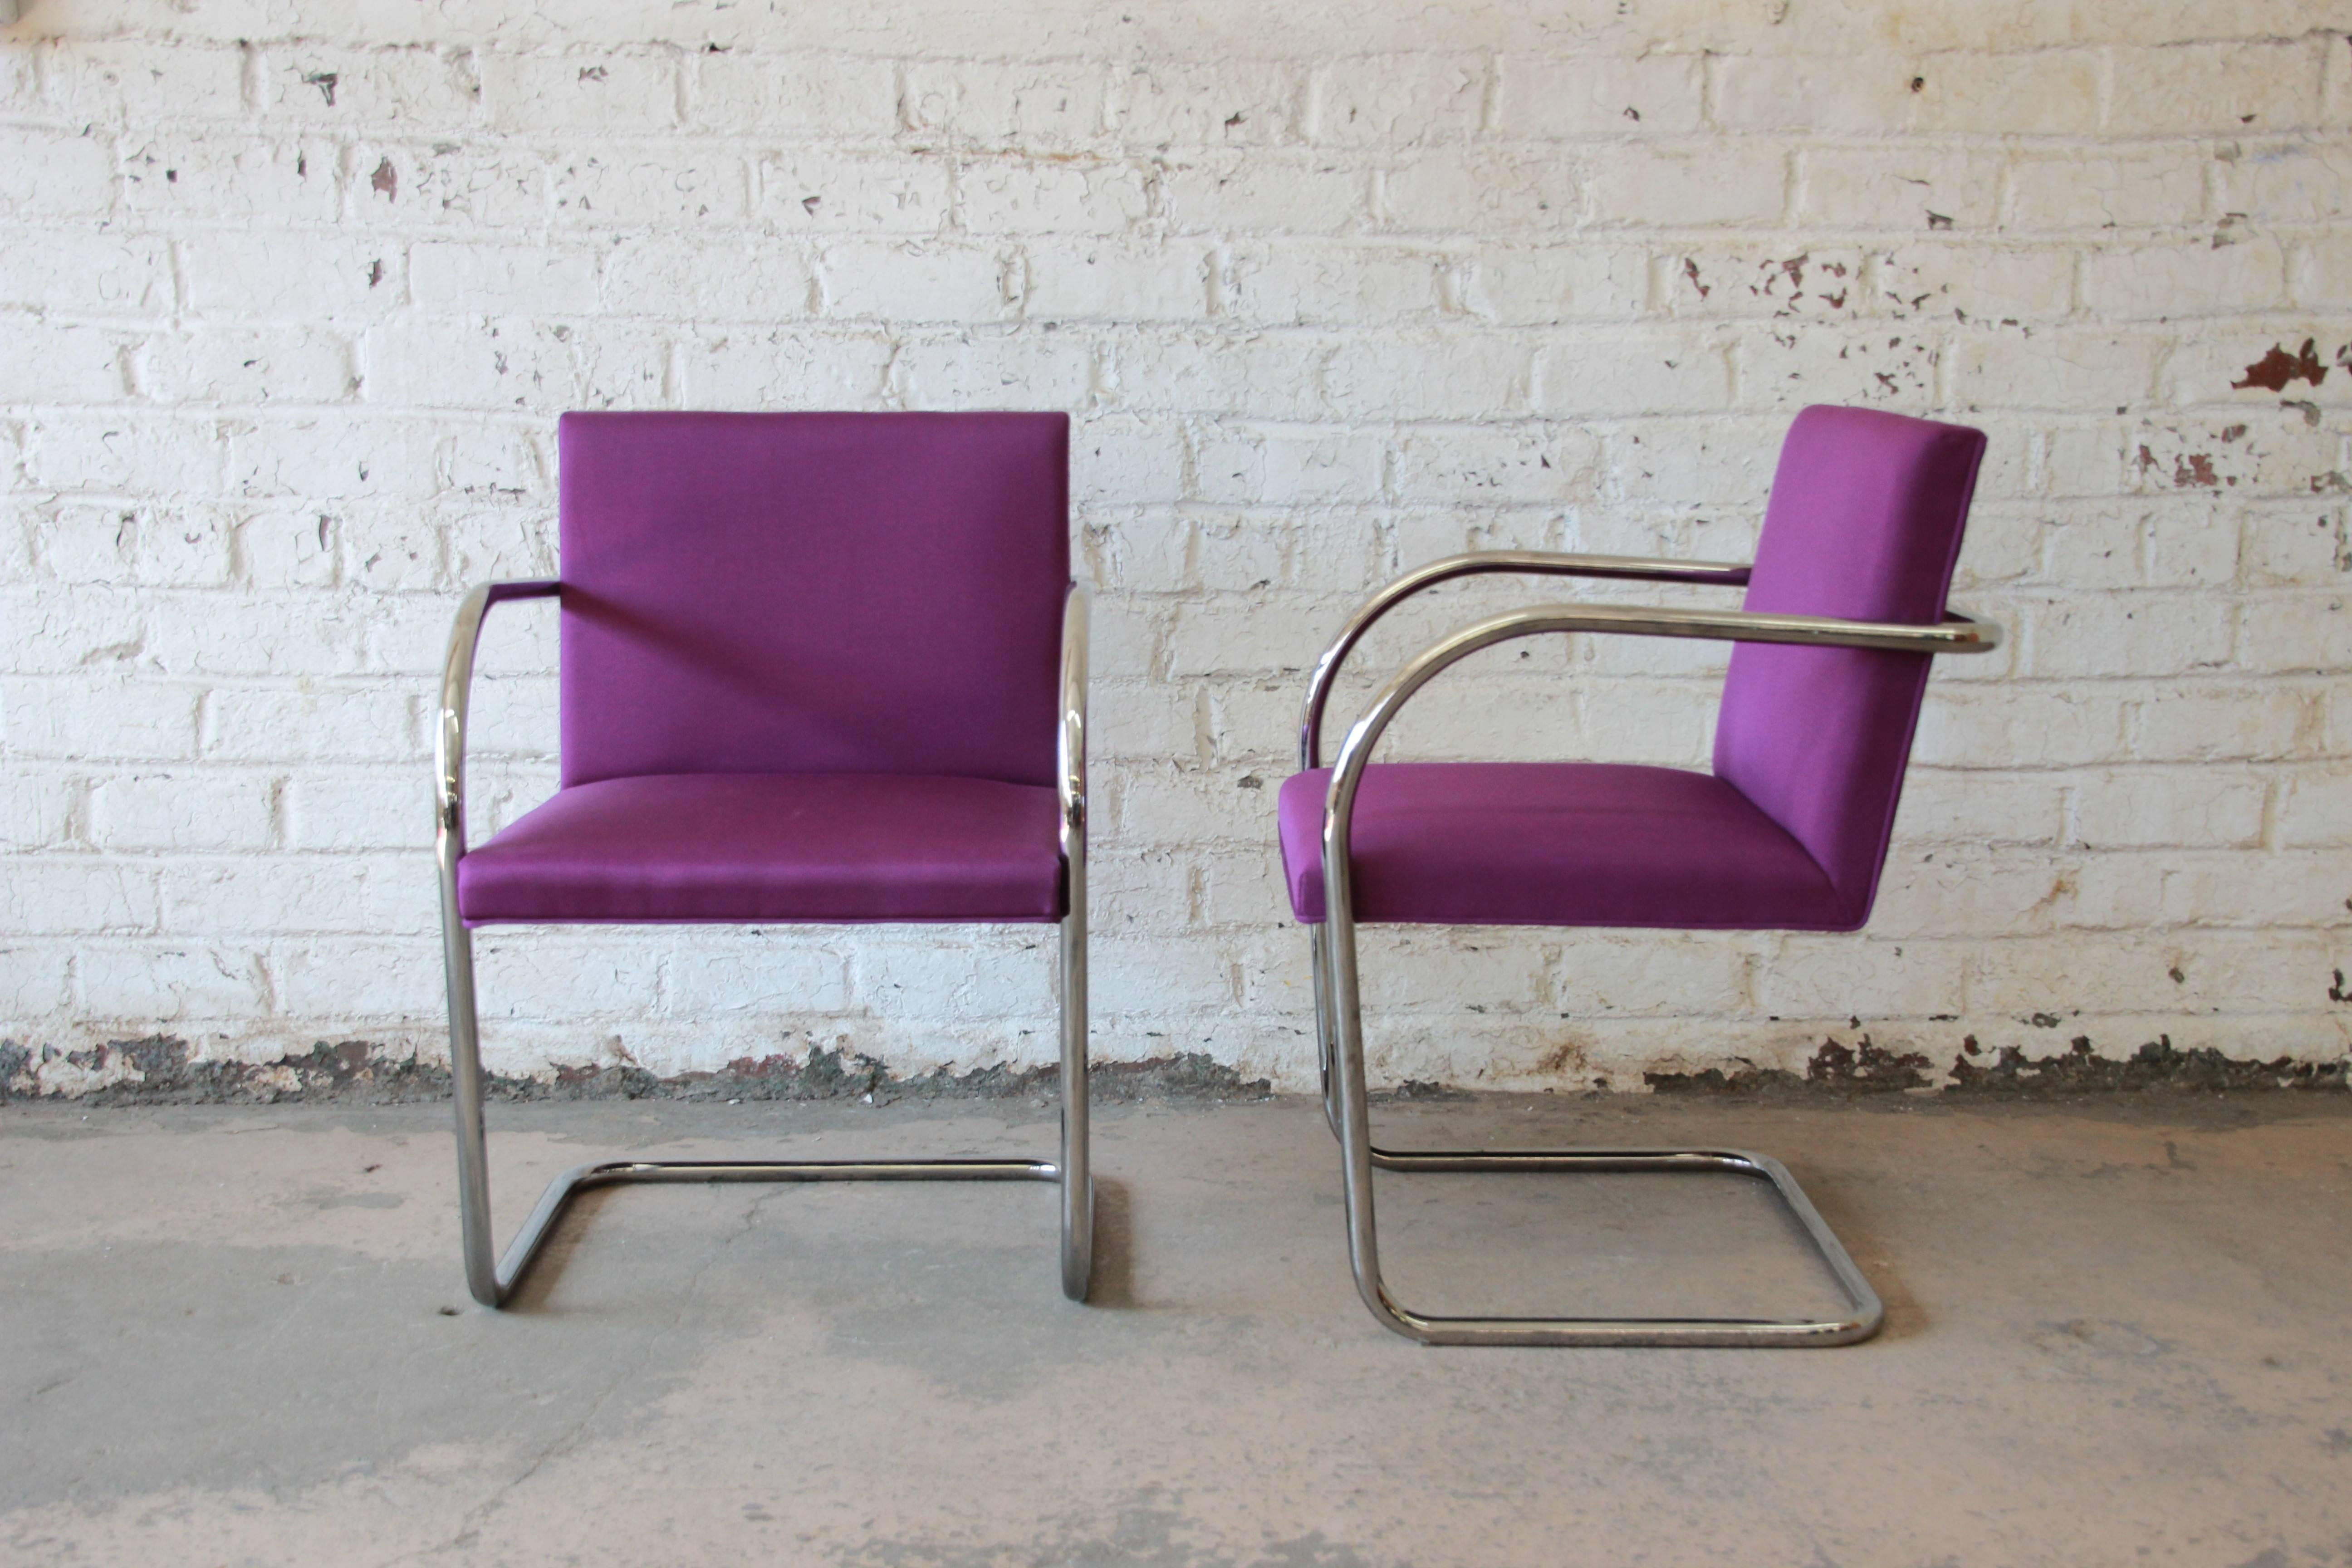 An excellent pair of Brno tubular chairs in Byzantium purple wool upholstery. Designed by Ludwig Mies van der Rohe in 1930 for the Tugendhat House. Chrome-plated steel frame. Signed label Knoll International. Measure: Arm height is 25.5